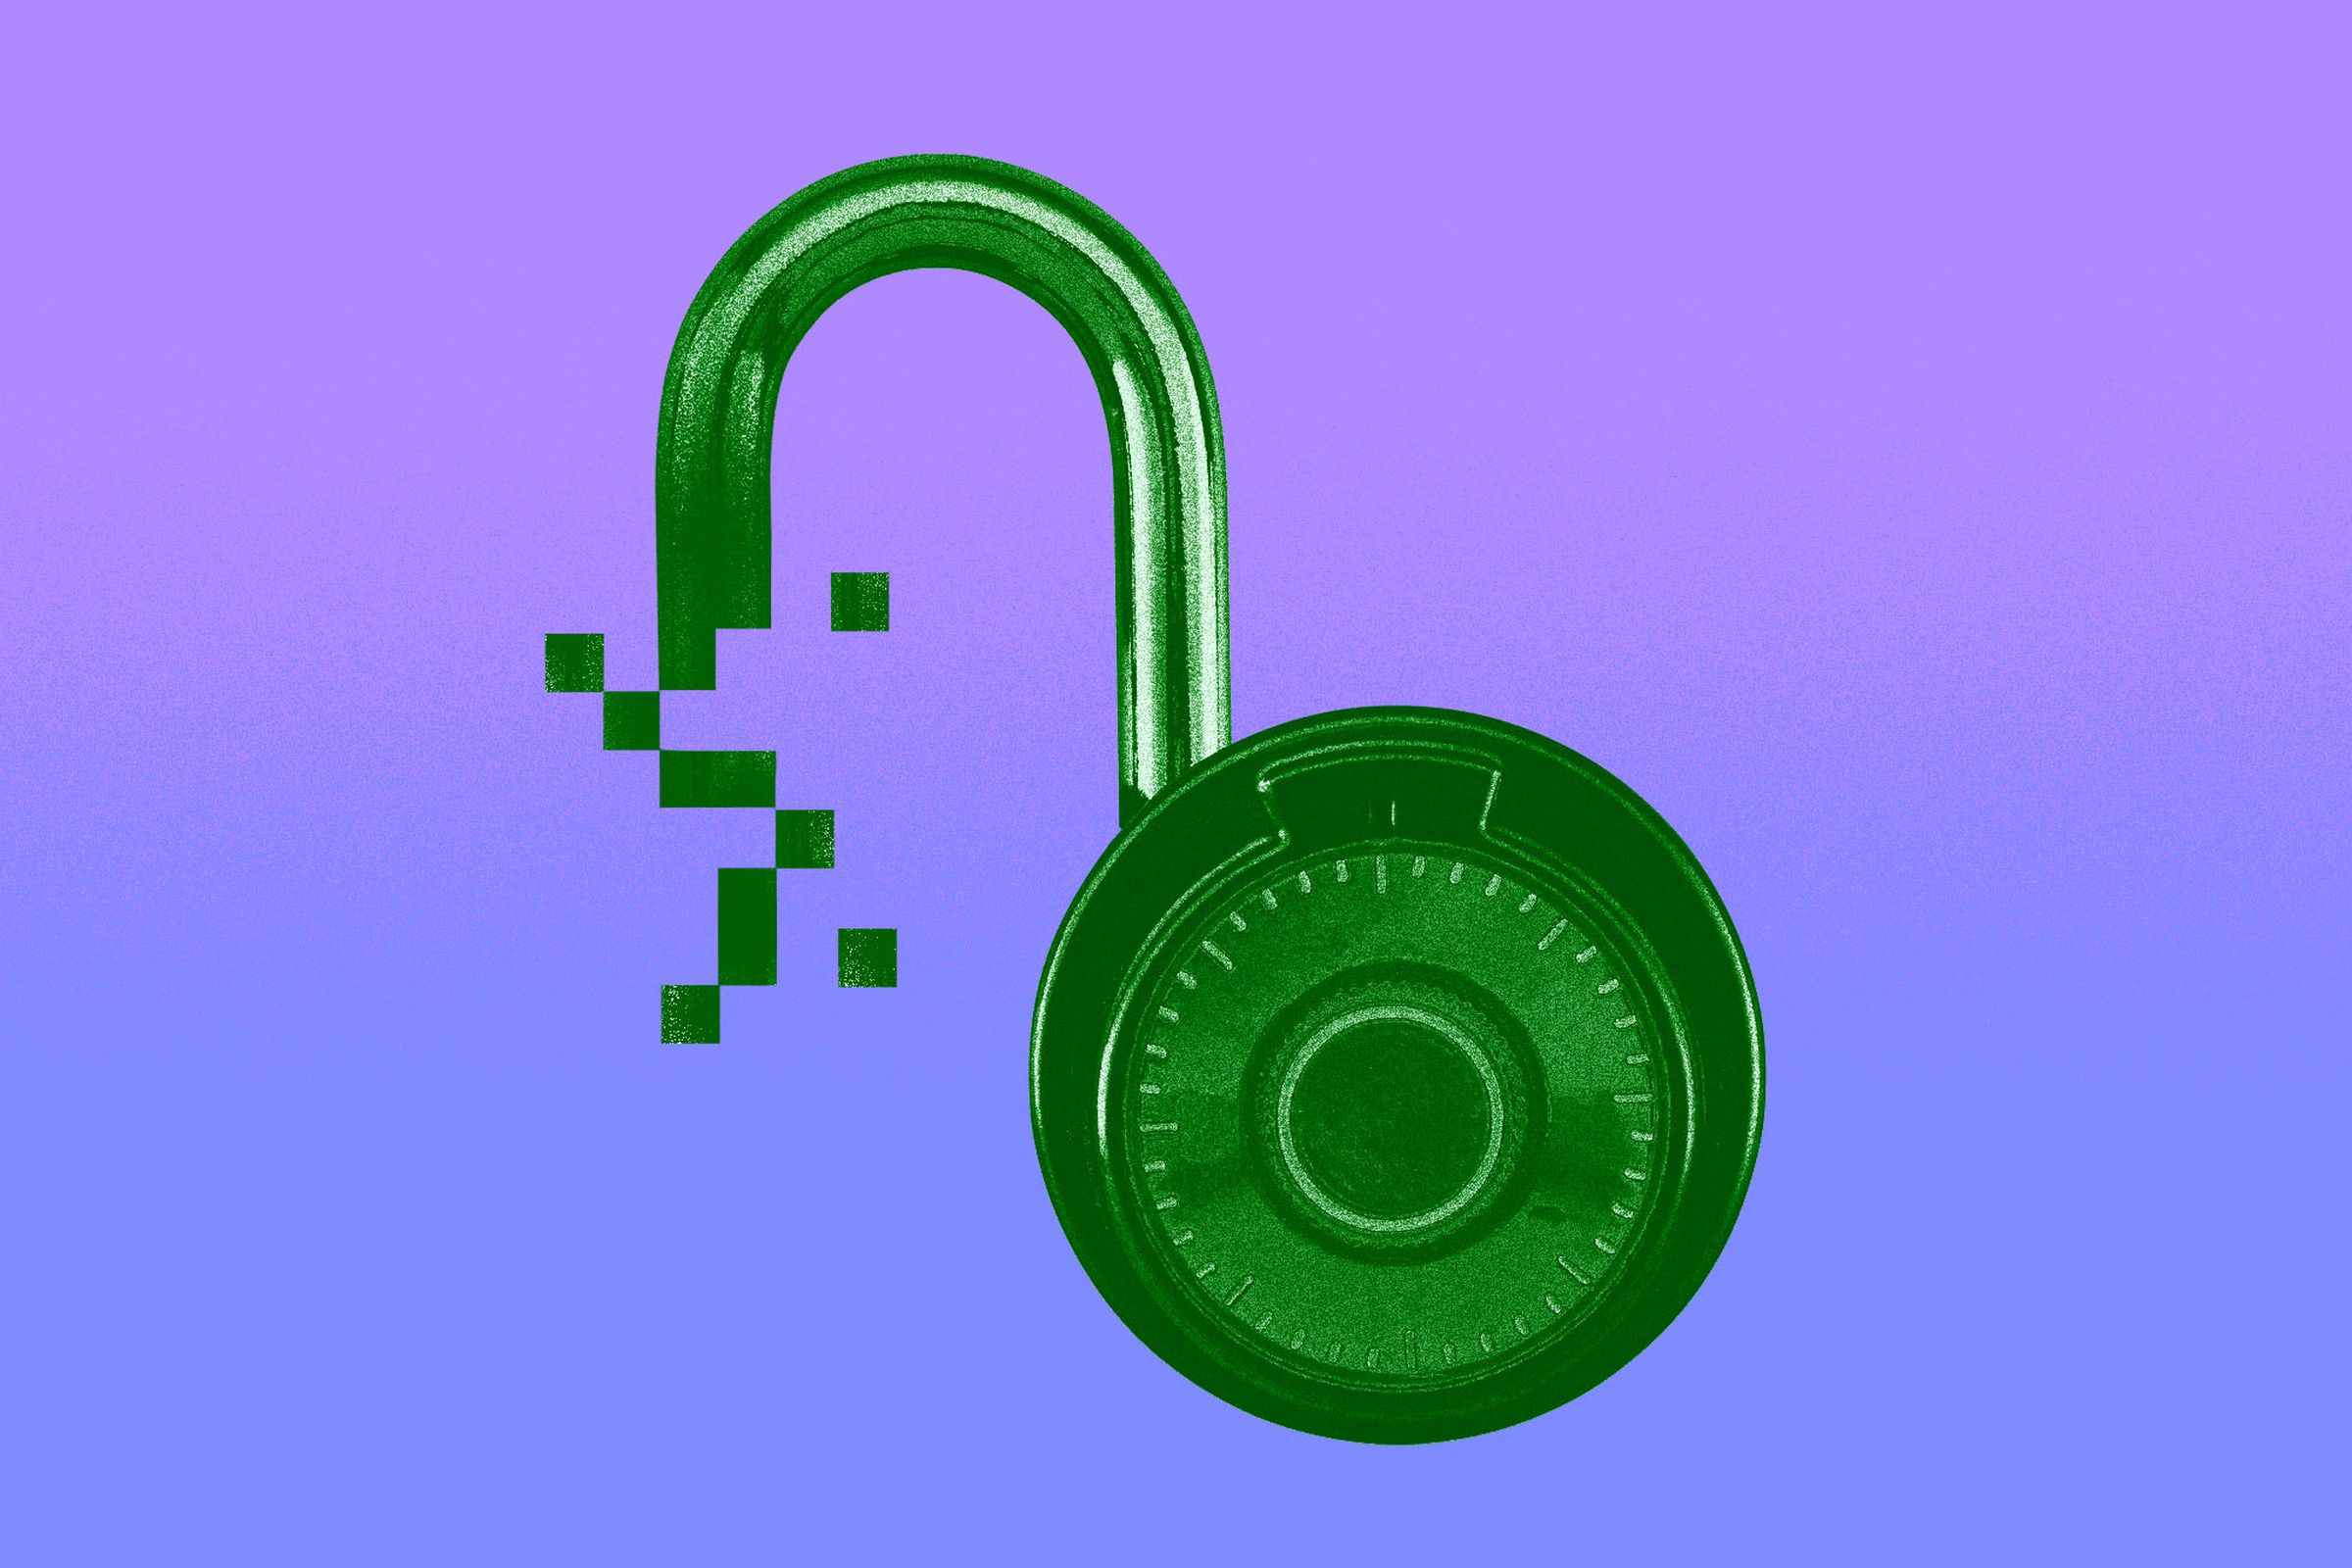 Illustration of a closed combination lock turning into pixels, implying a data breach or a lack of security.